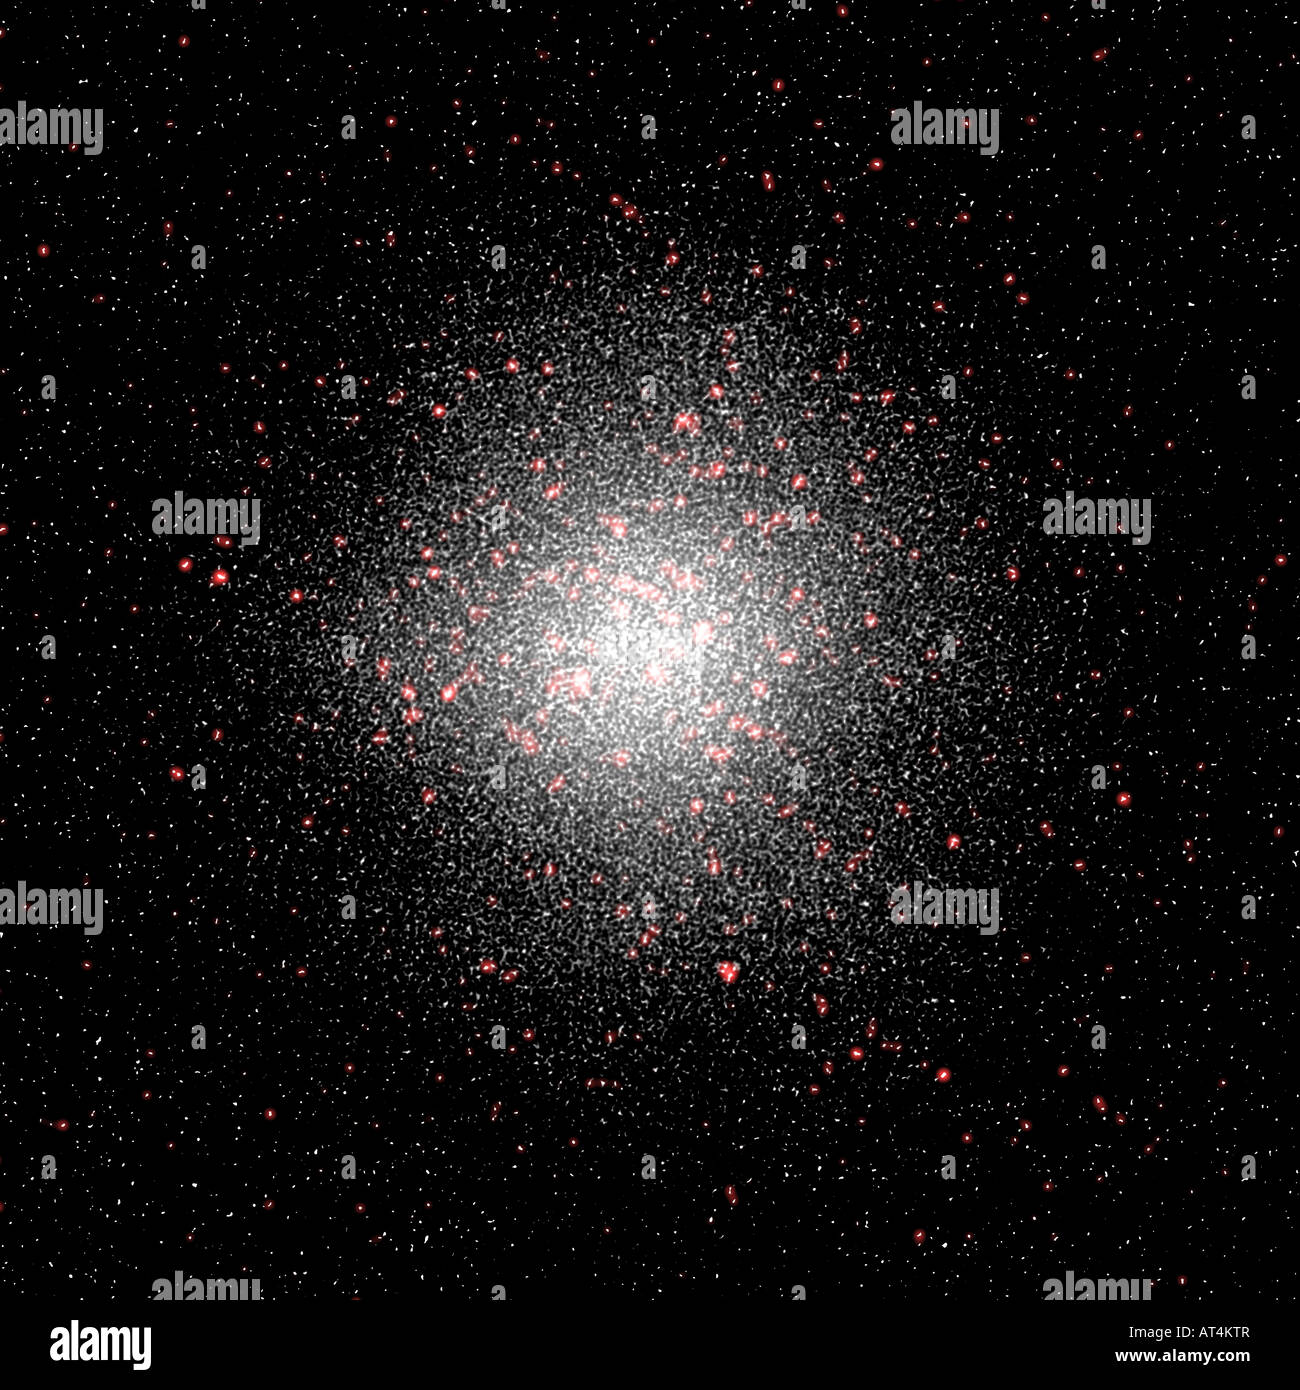 image of star cluster in deep space Stock Photo